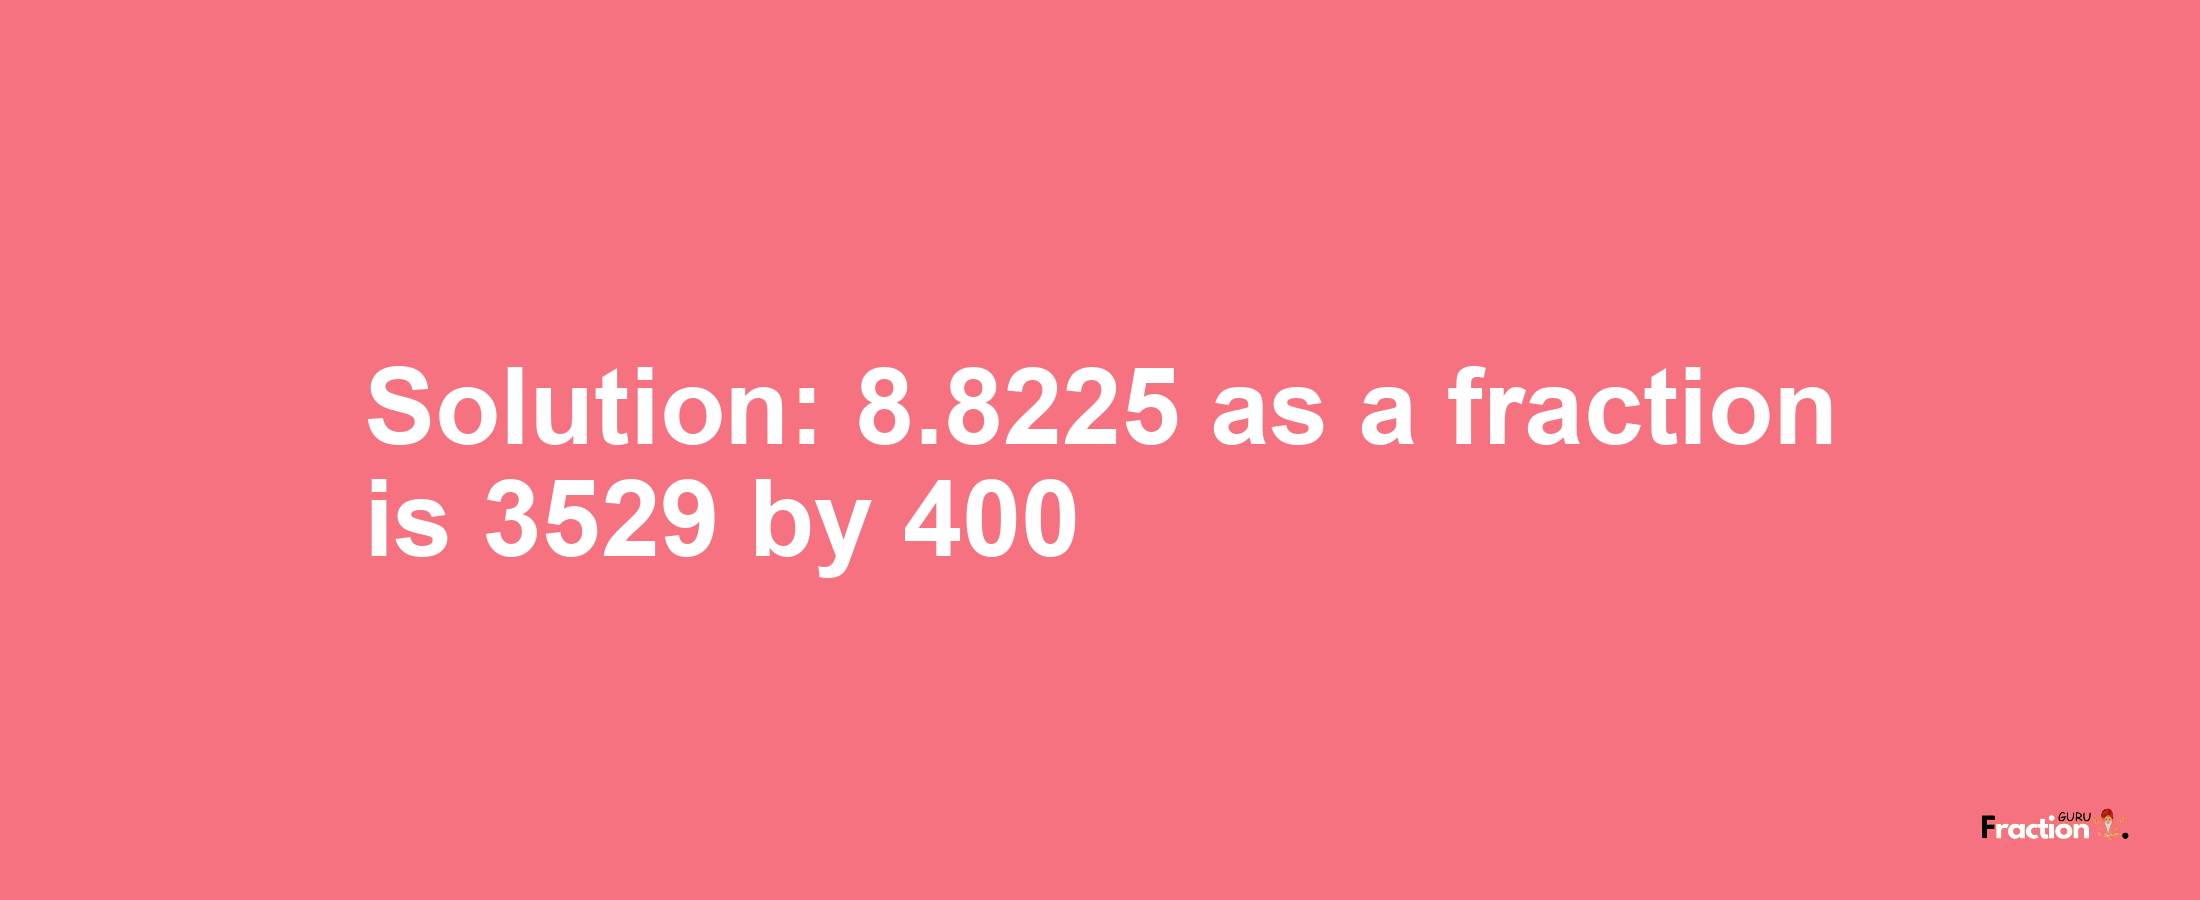 Solution:8.8225 as a fraction is 3529/400